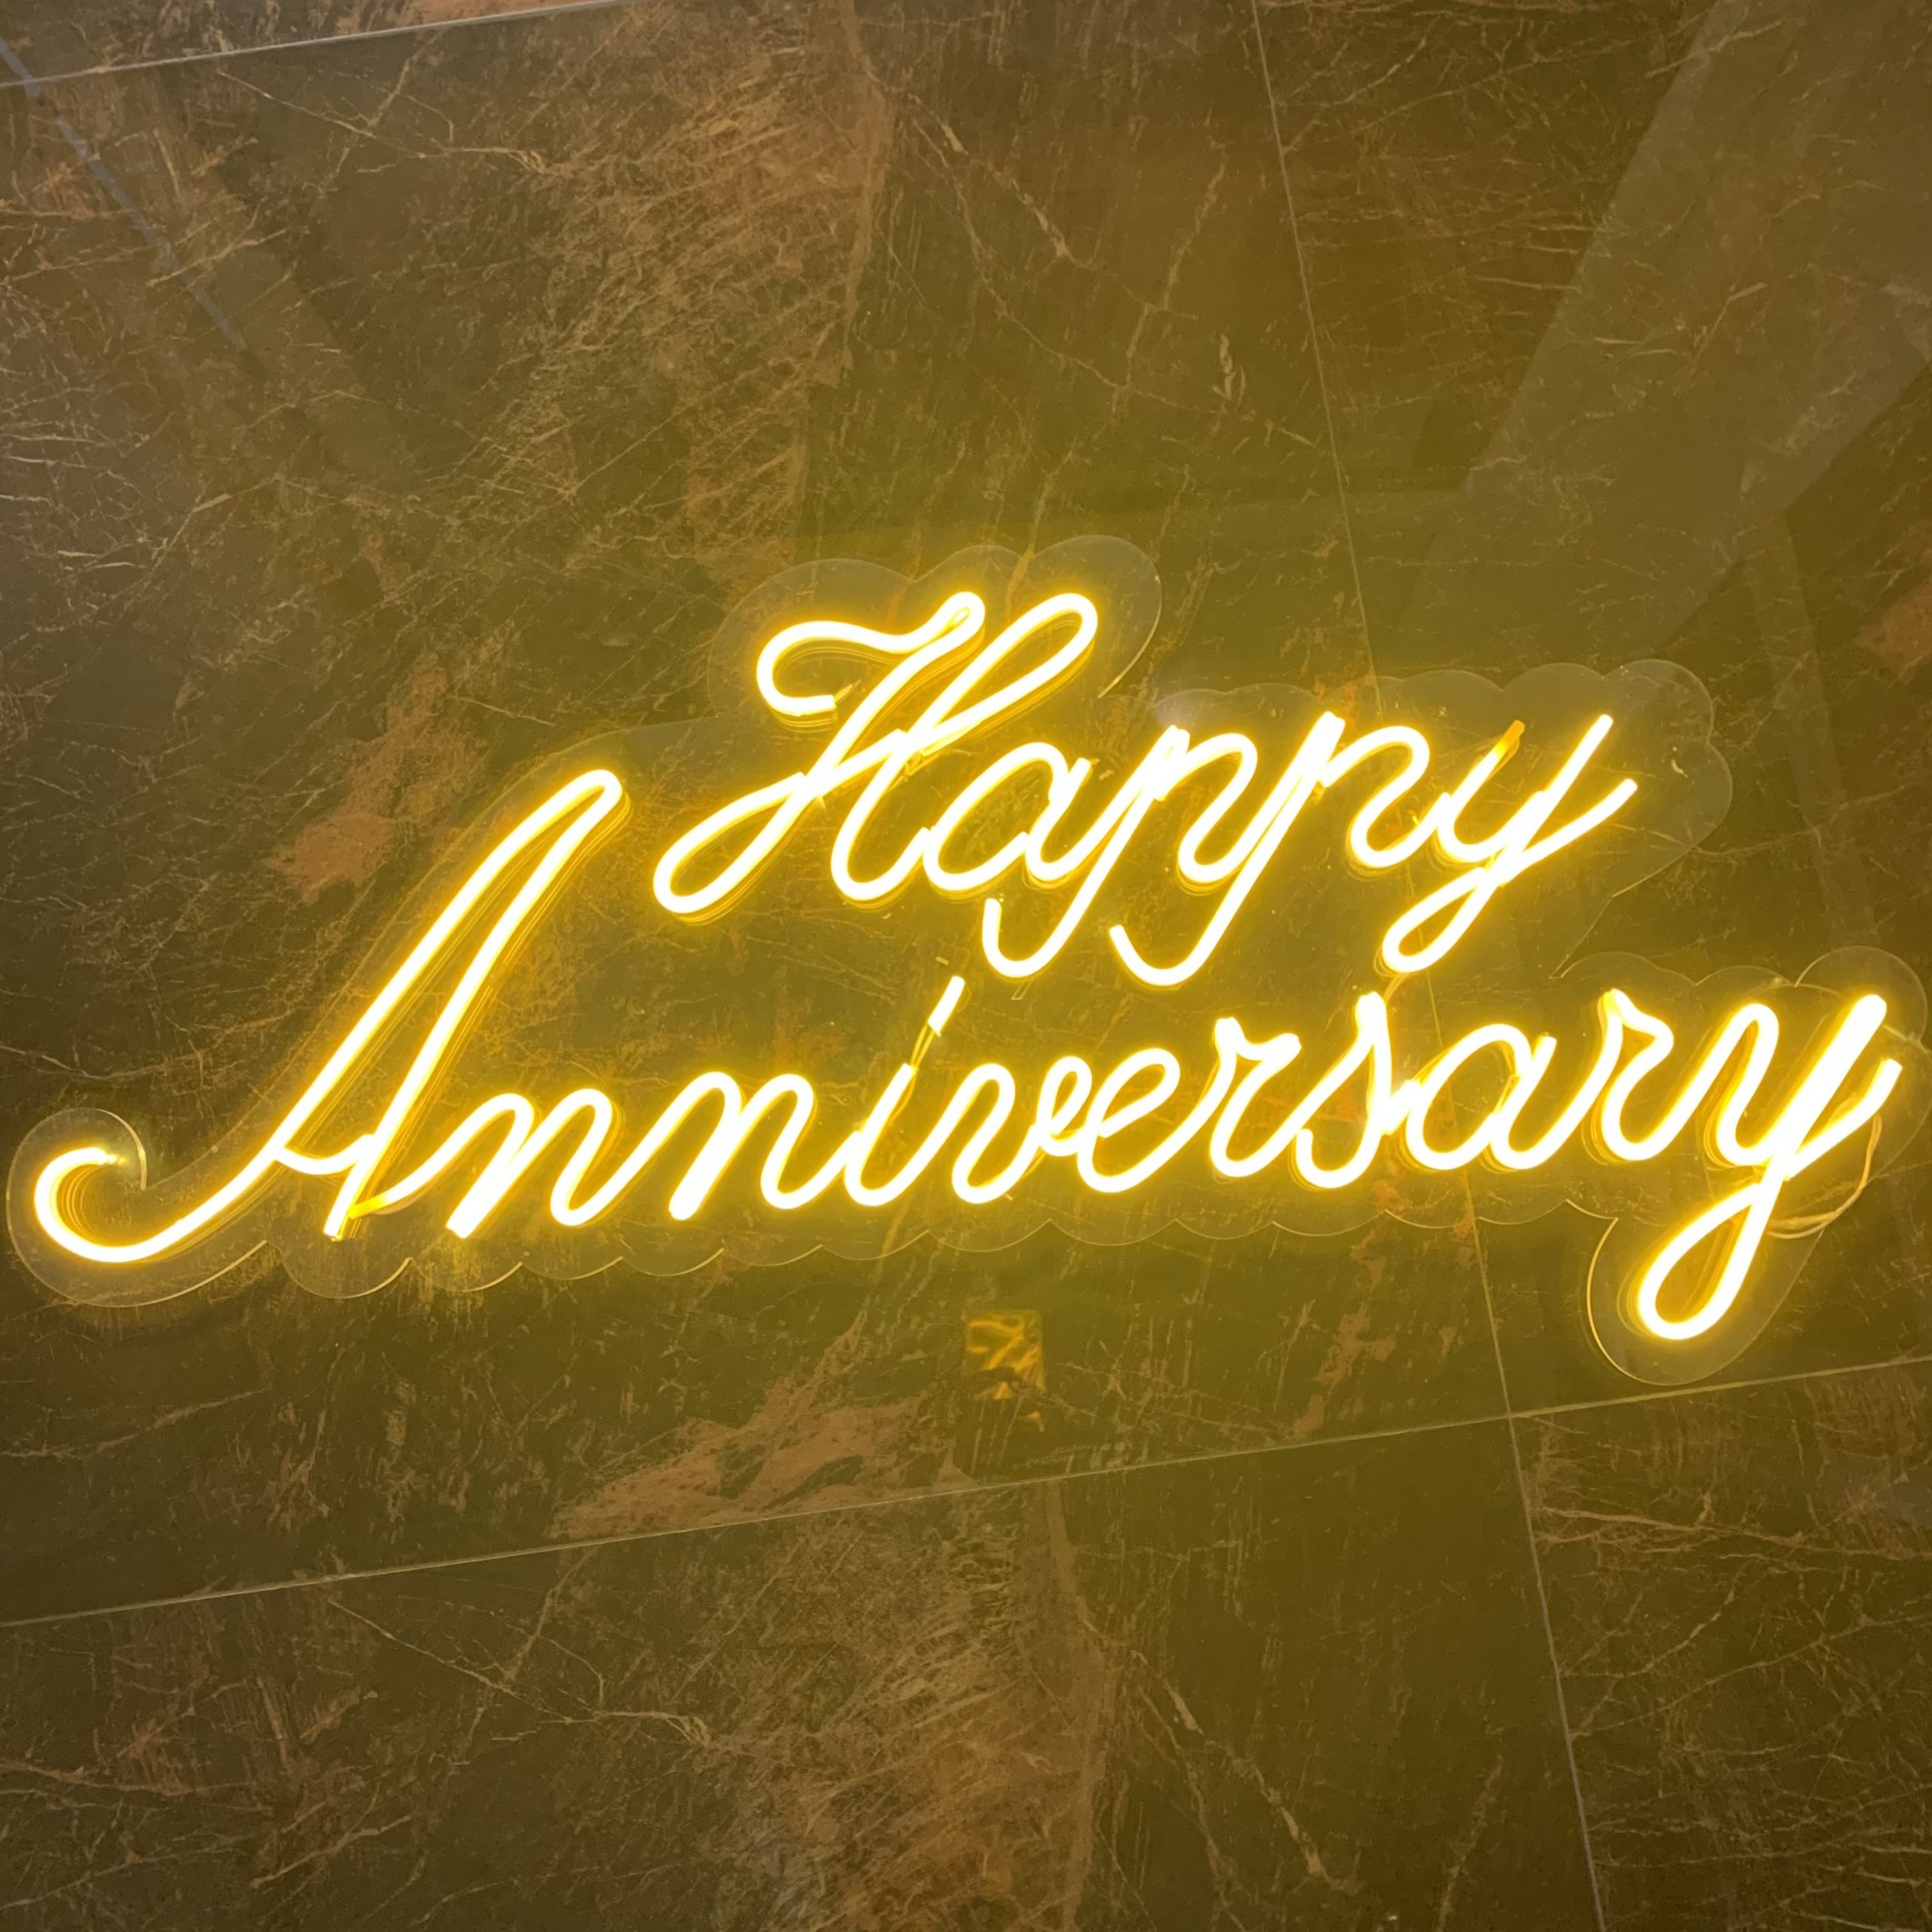 Upgrade and replace with "Happy Anniversary" Neon Light